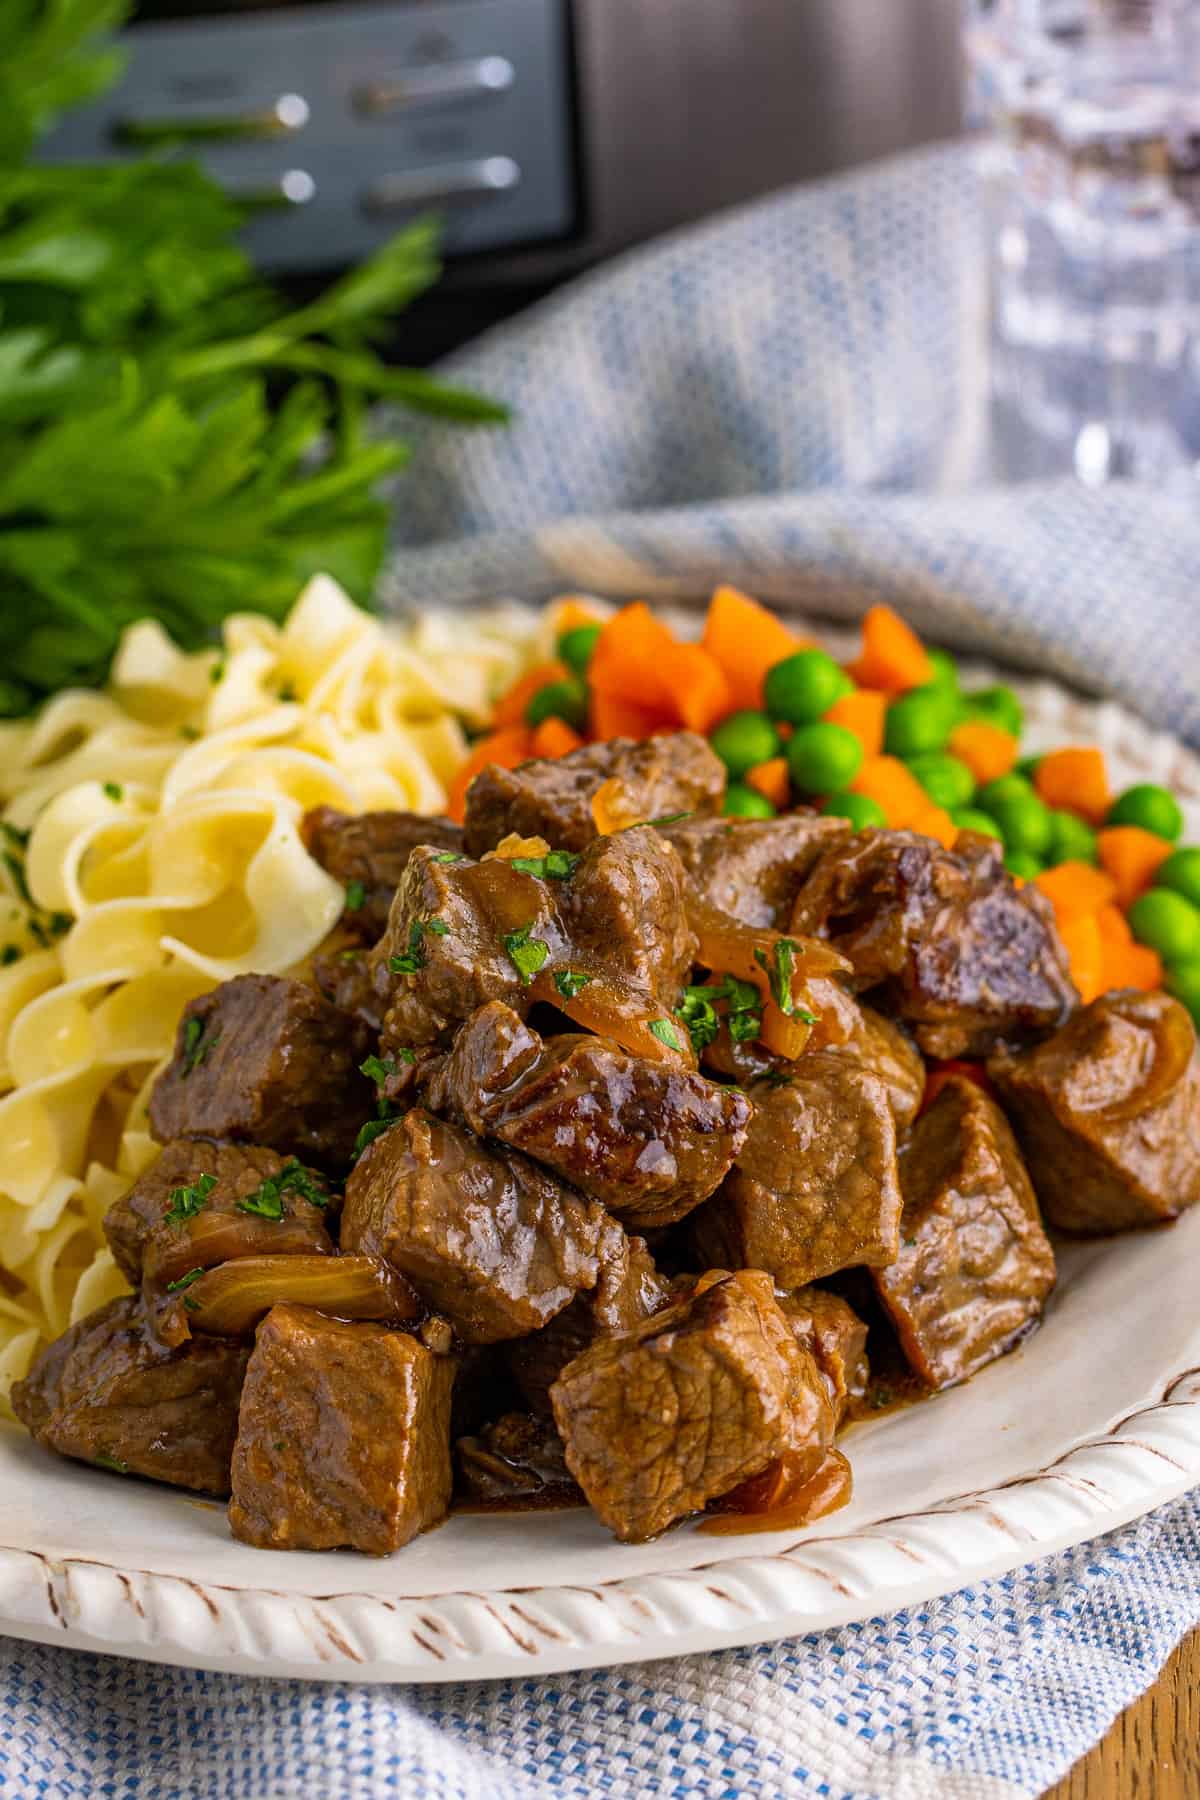 Steak bites, noodles, and vegetables on white plate with glass of water and slow cooker in background.